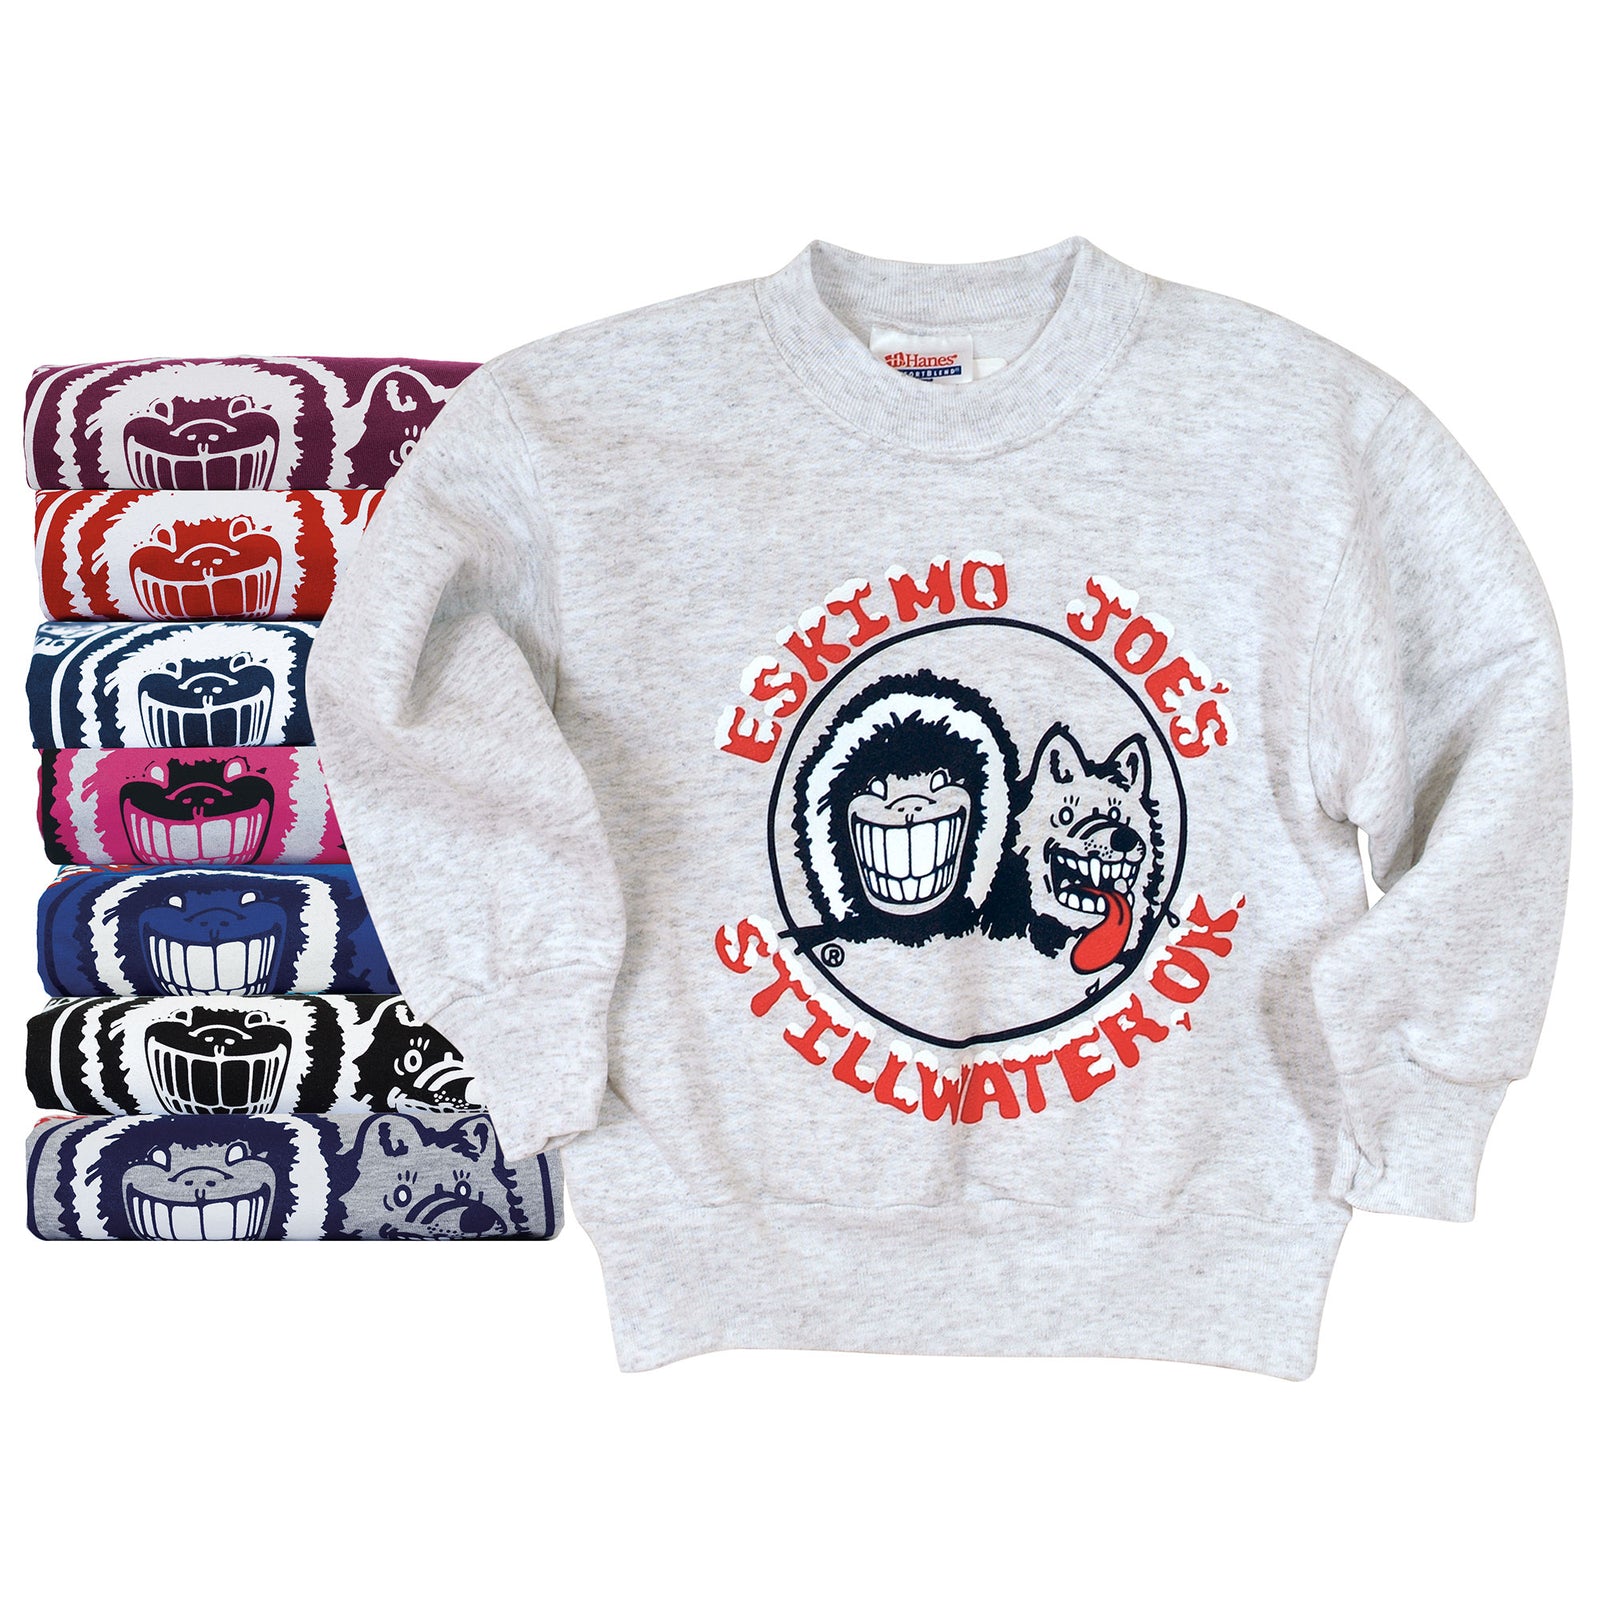 YOUTH CLASSIC SWEAT - YS